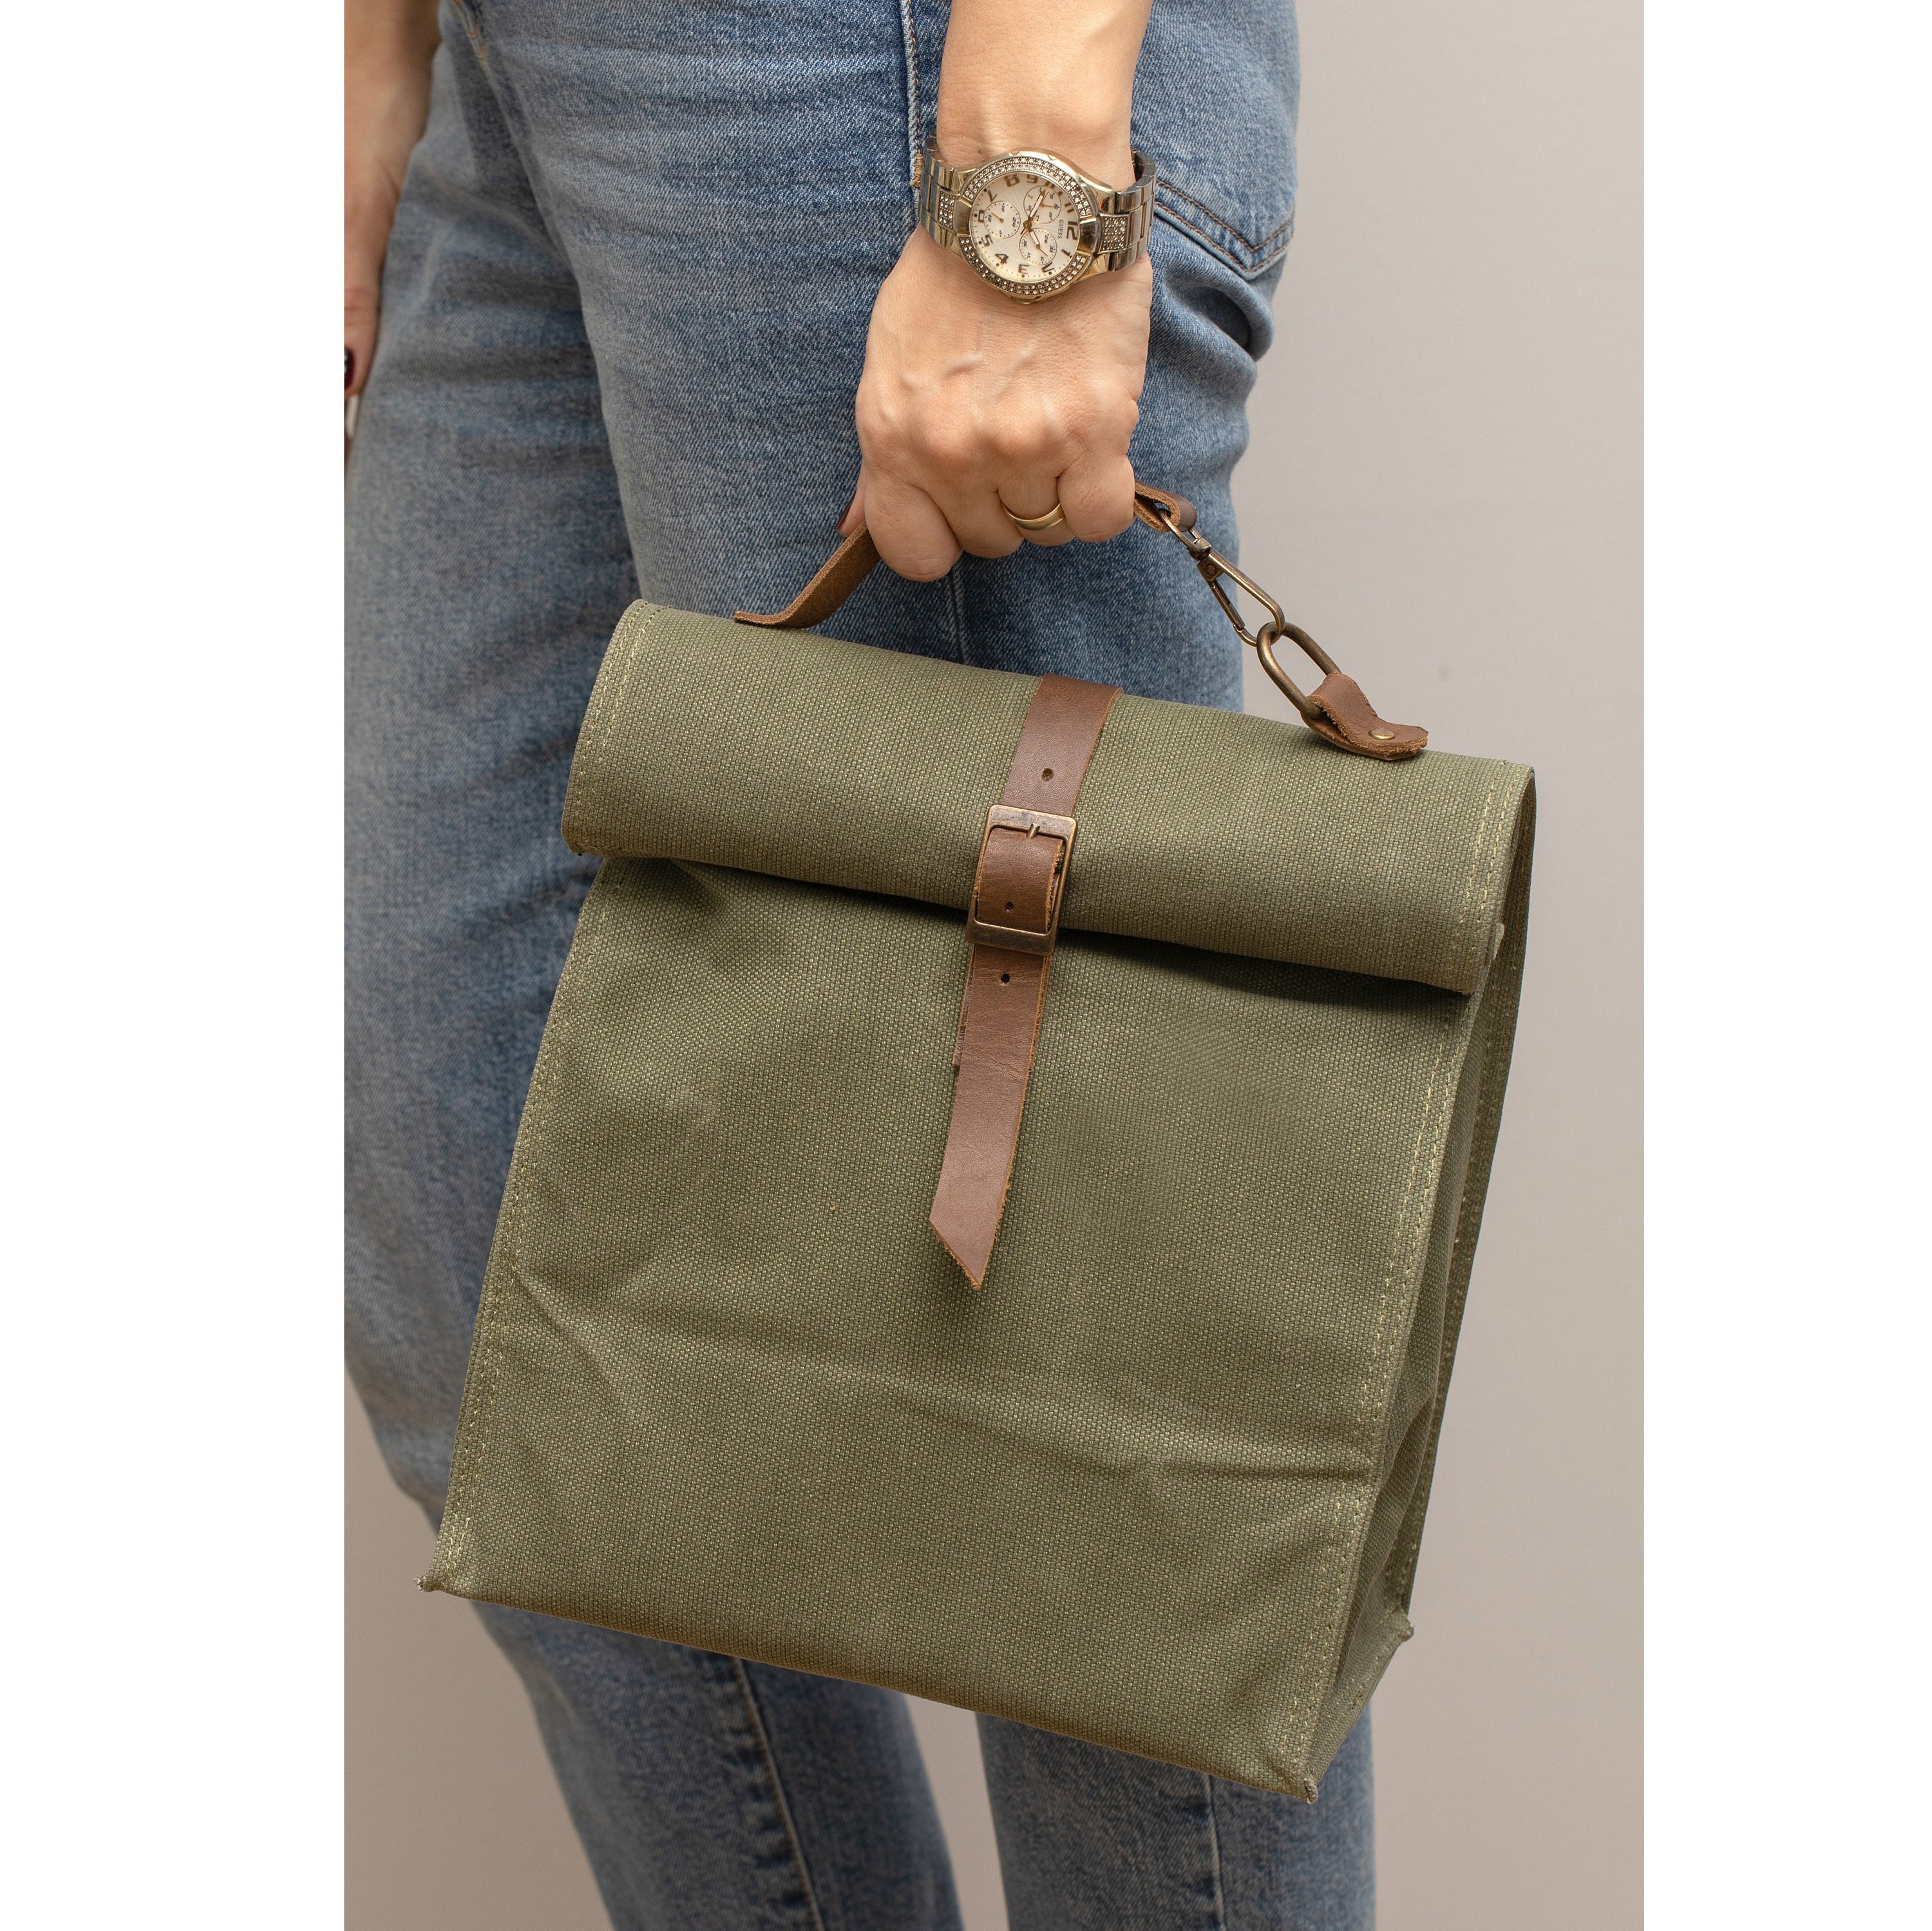 Waxed Canvas Insulated Lunch Bag, Personalized Large Capacity